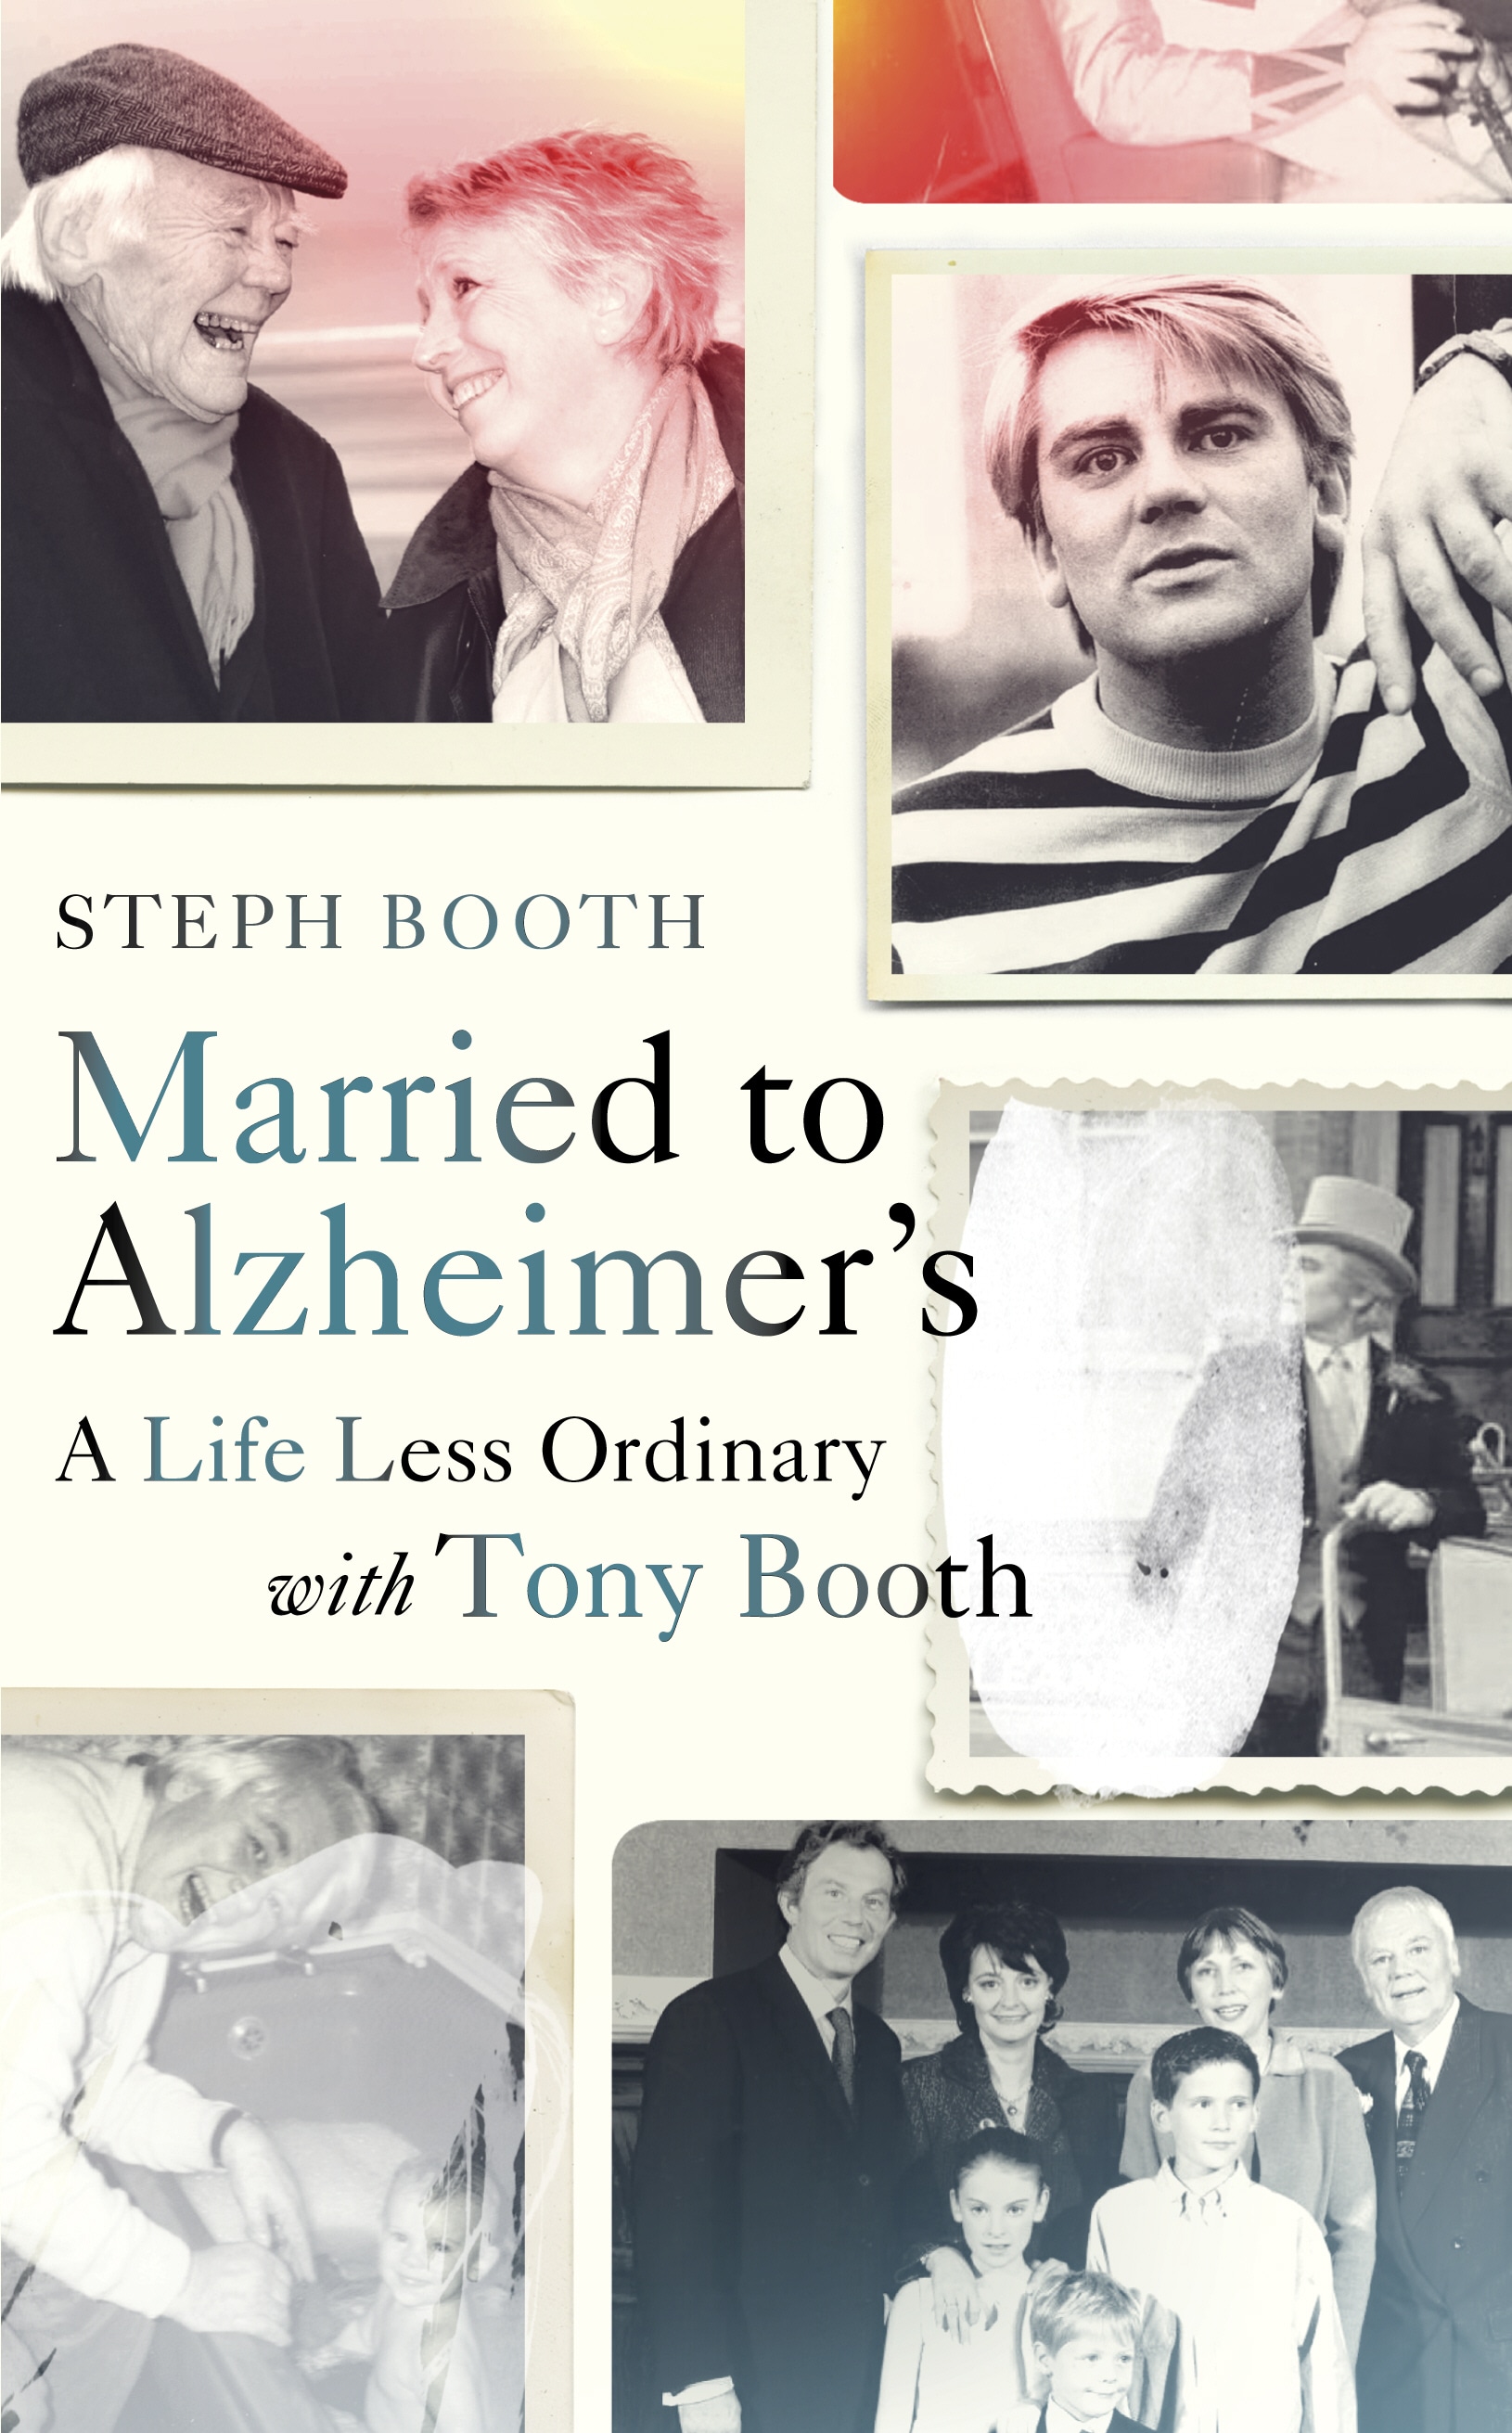 Book “Married to Alzheimer's” by Steph Booth — March 7, 2019